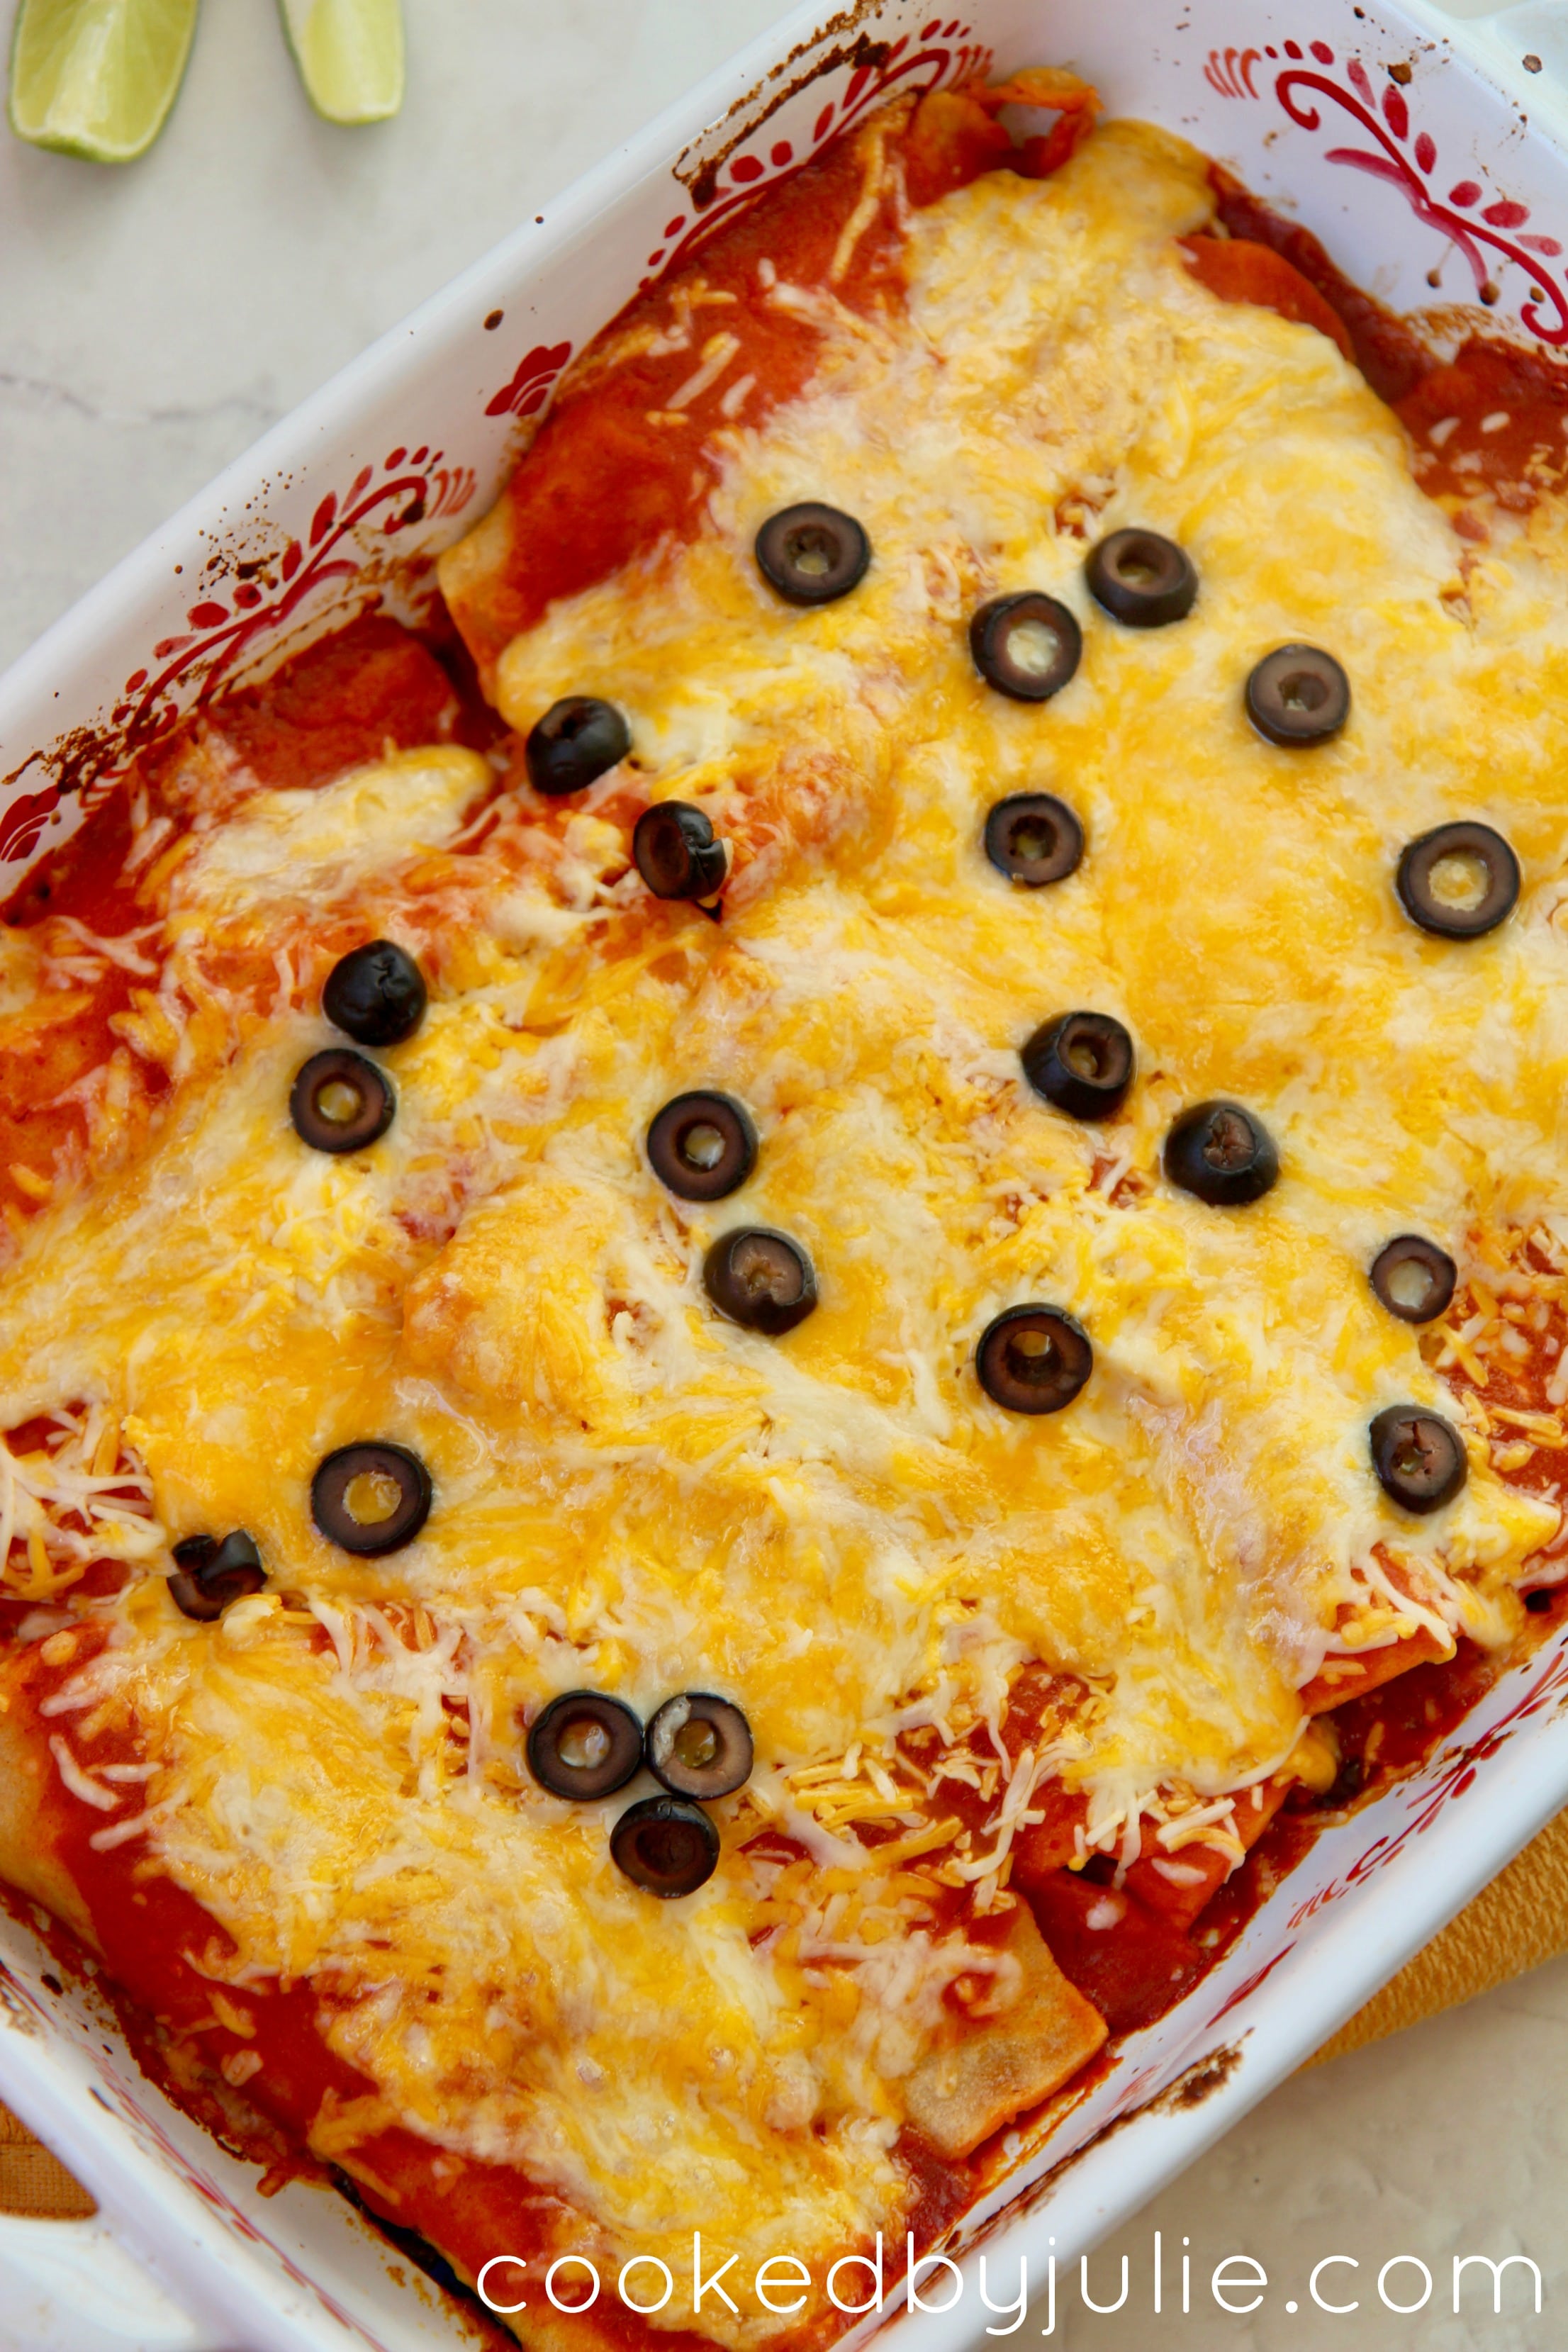 These beef enchiladas are made with a homemade red sauce that you can make ahead of time